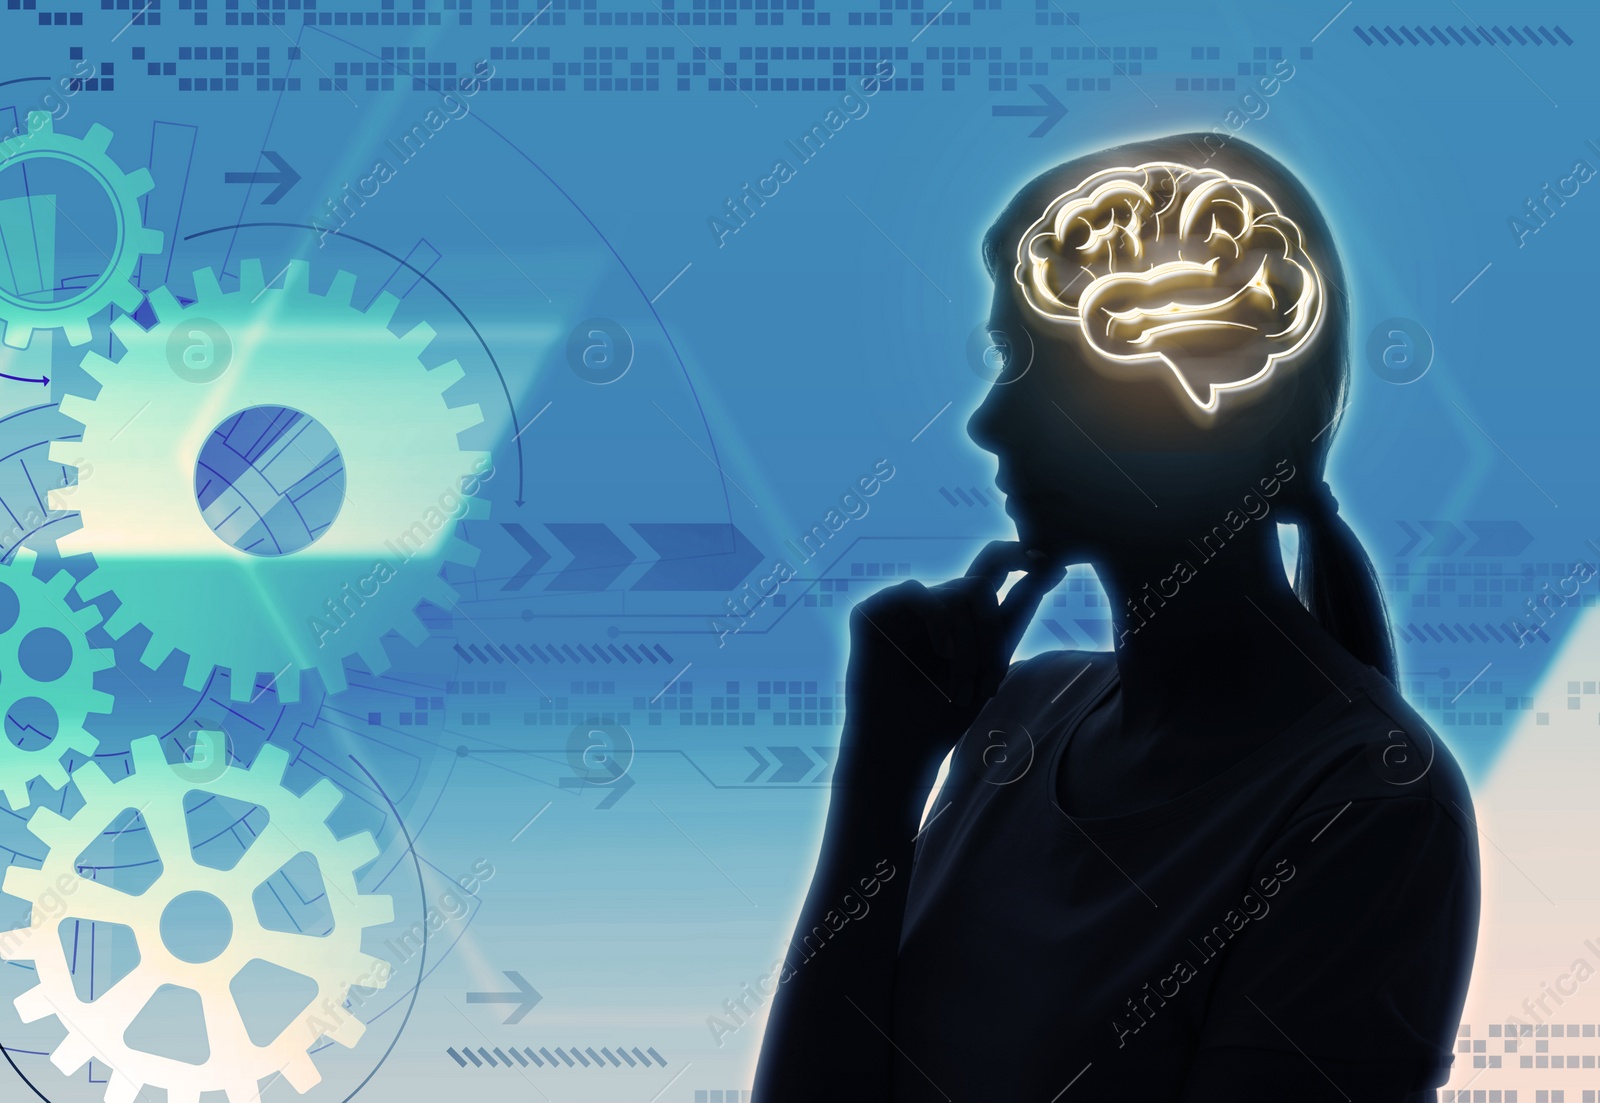 Image of Memory. Silhouette of woman with illustration of brain against blue background